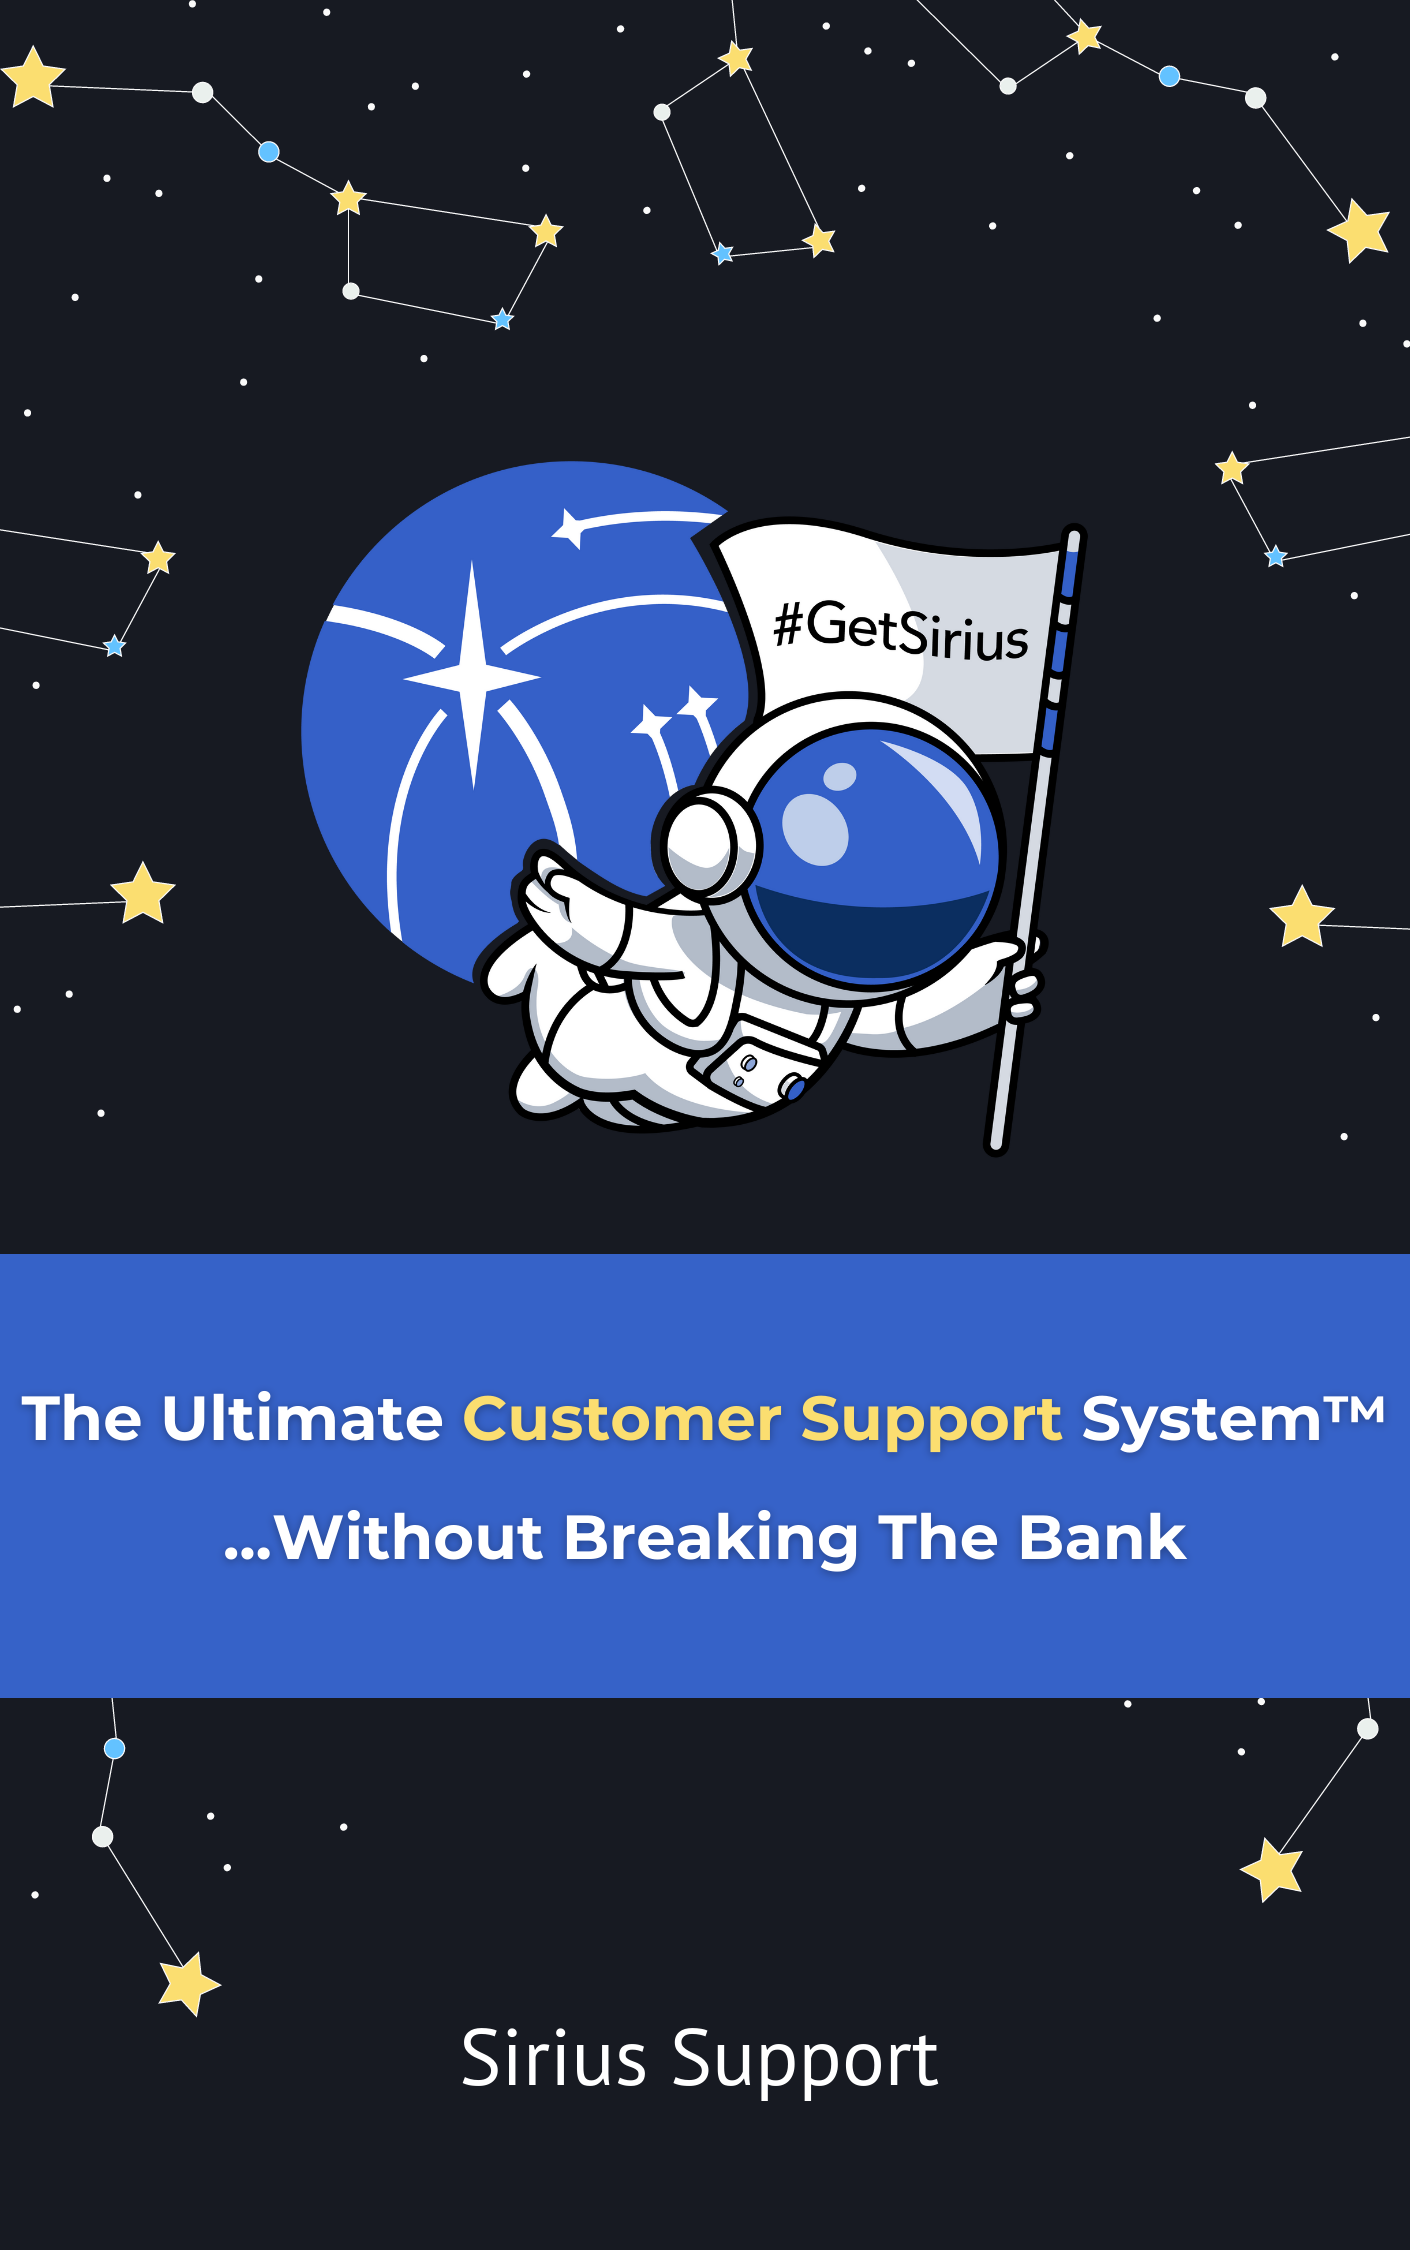 The Ultimate Customer Support System™… Without Breaking The Bank Ebook #2